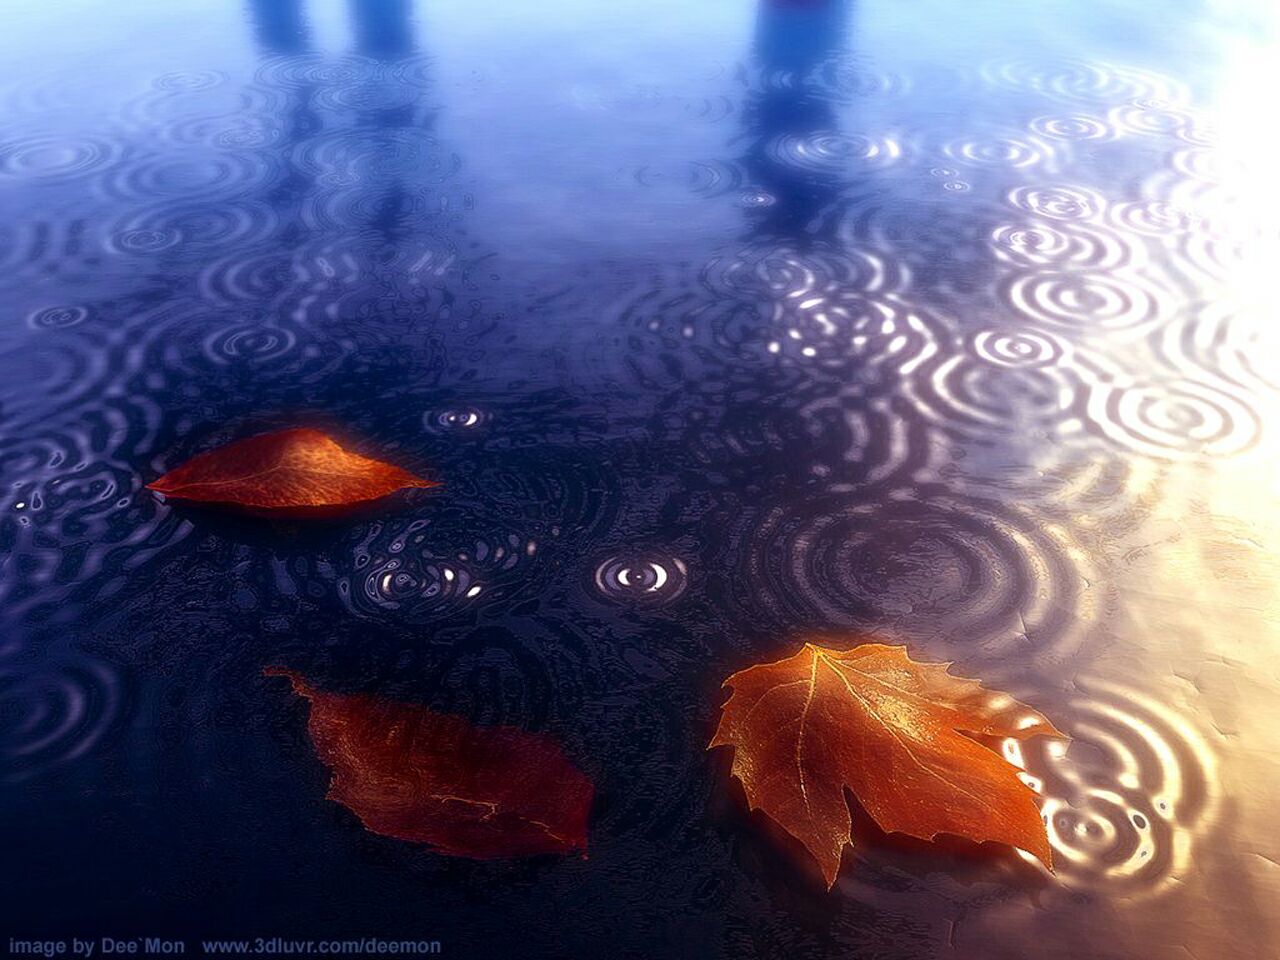 Reflections Of The Fall - Autumn Leaves In A Puddle - HD Wallpaper 